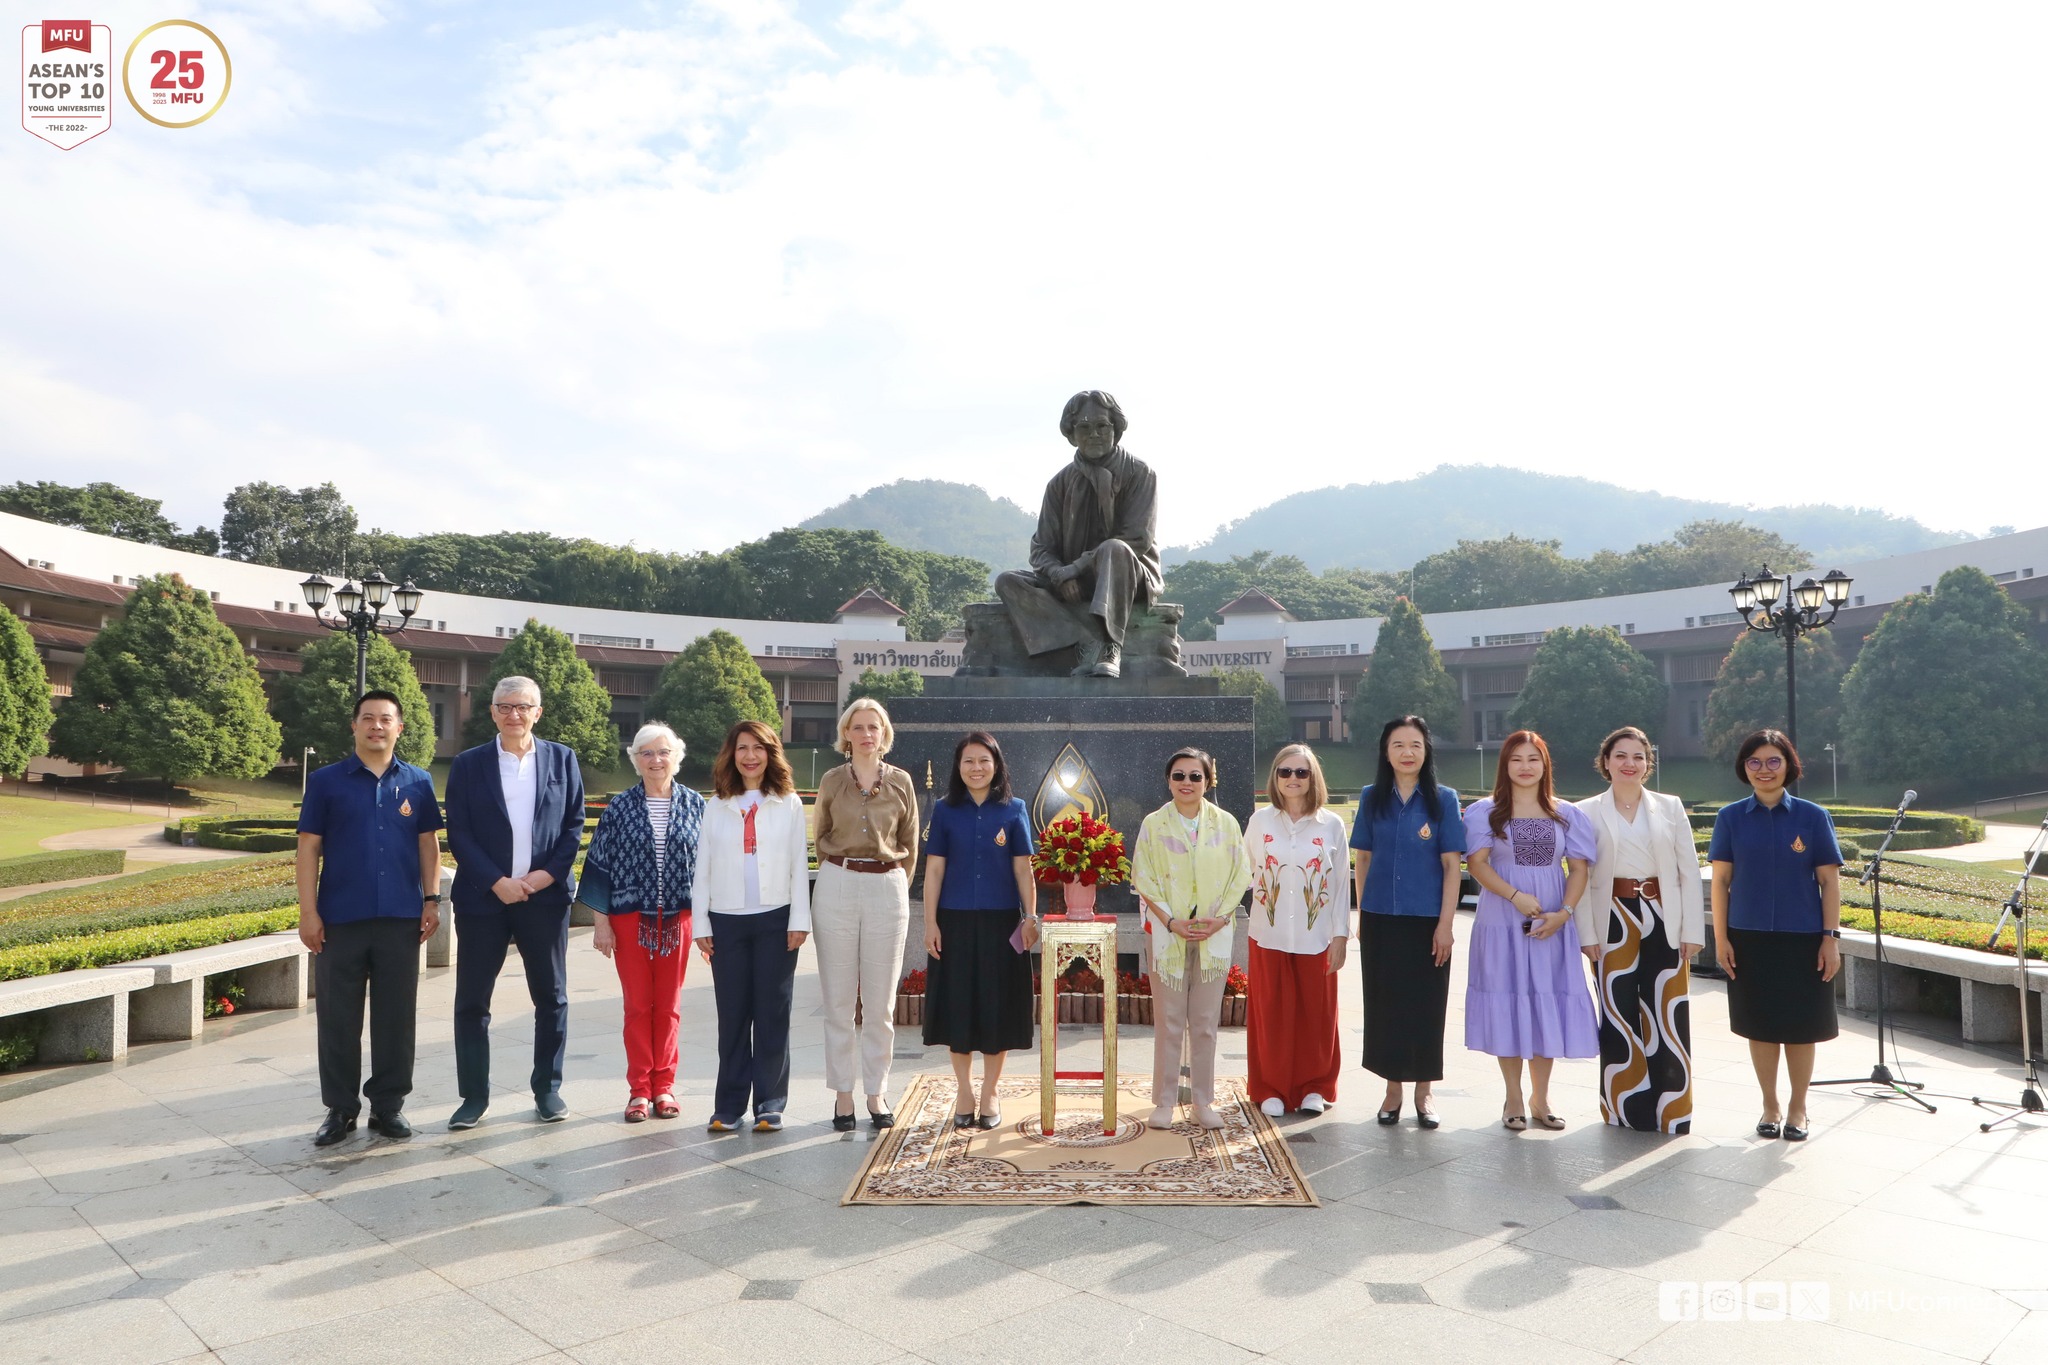 The Visit of Women Ambassadors for Future Collaboration